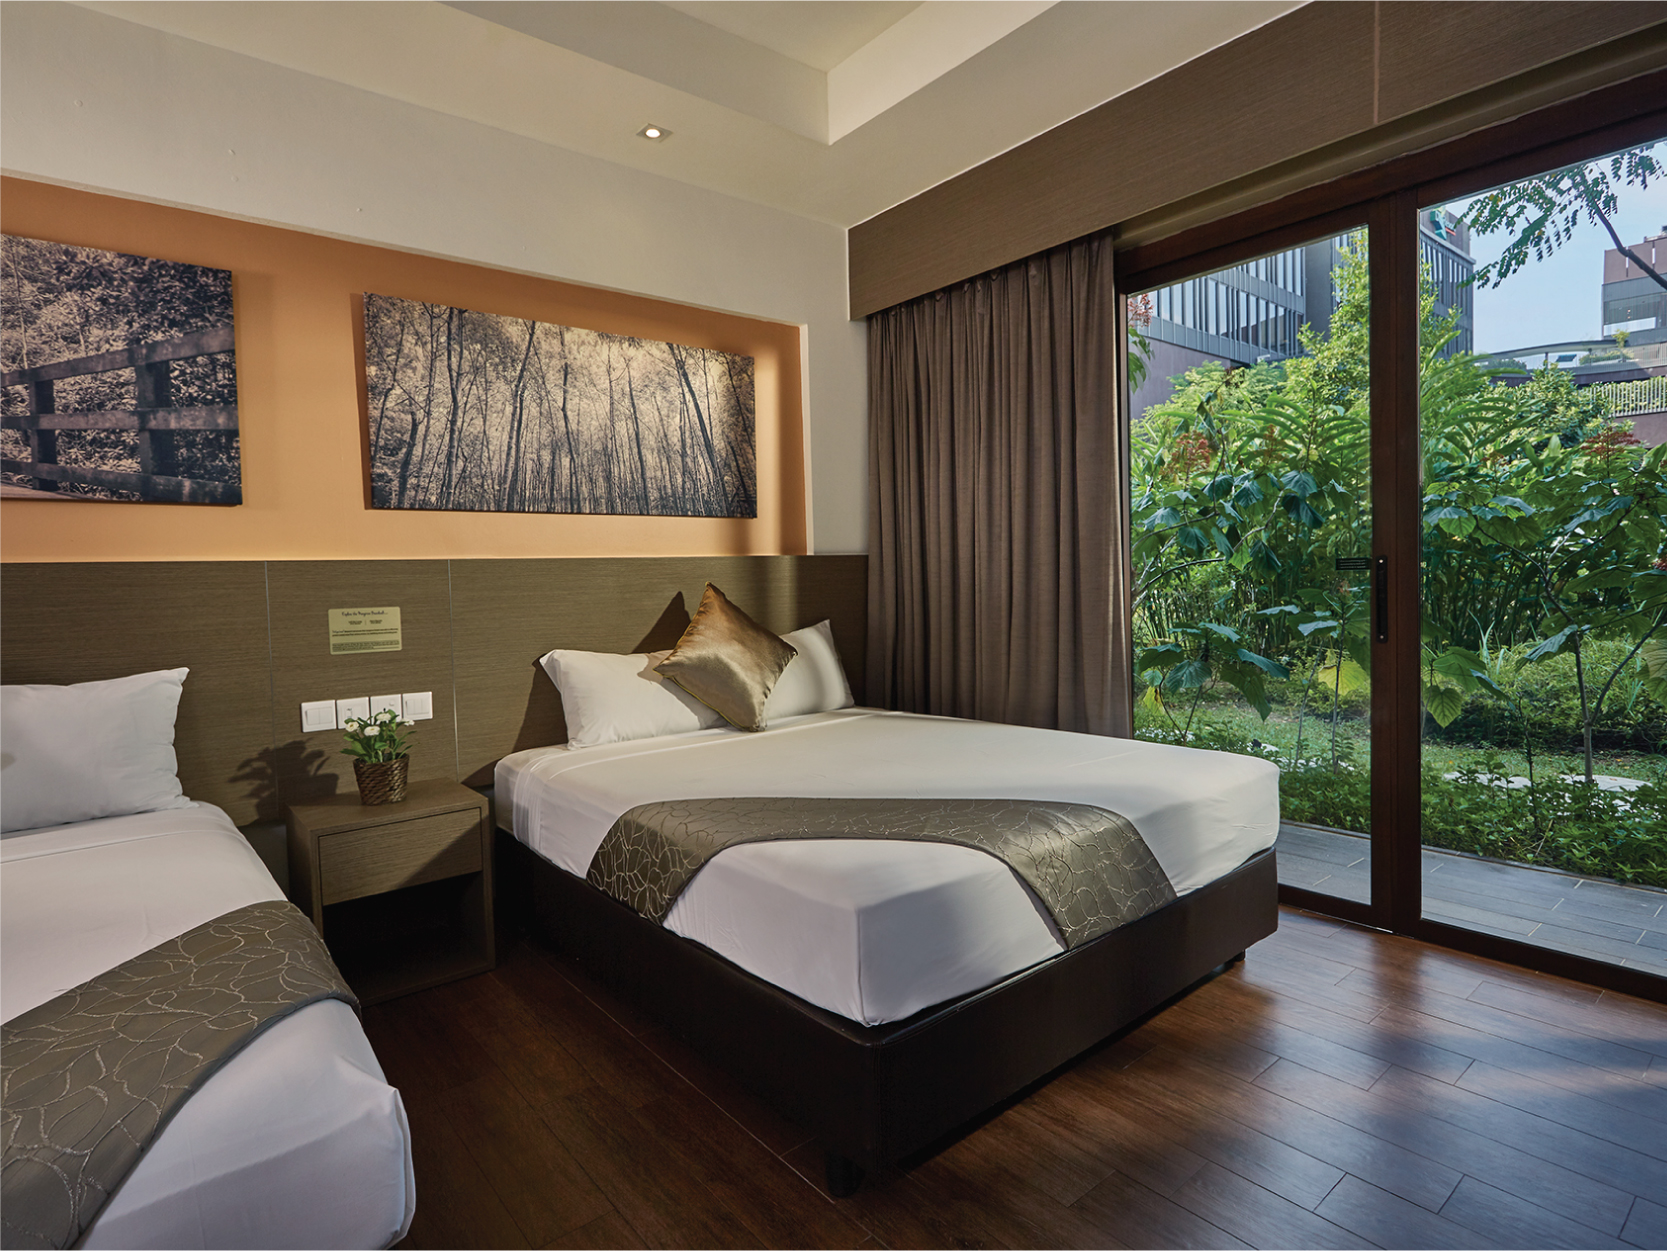 Mangrove Walk Rooms for staycation with family and friends at D'Resort